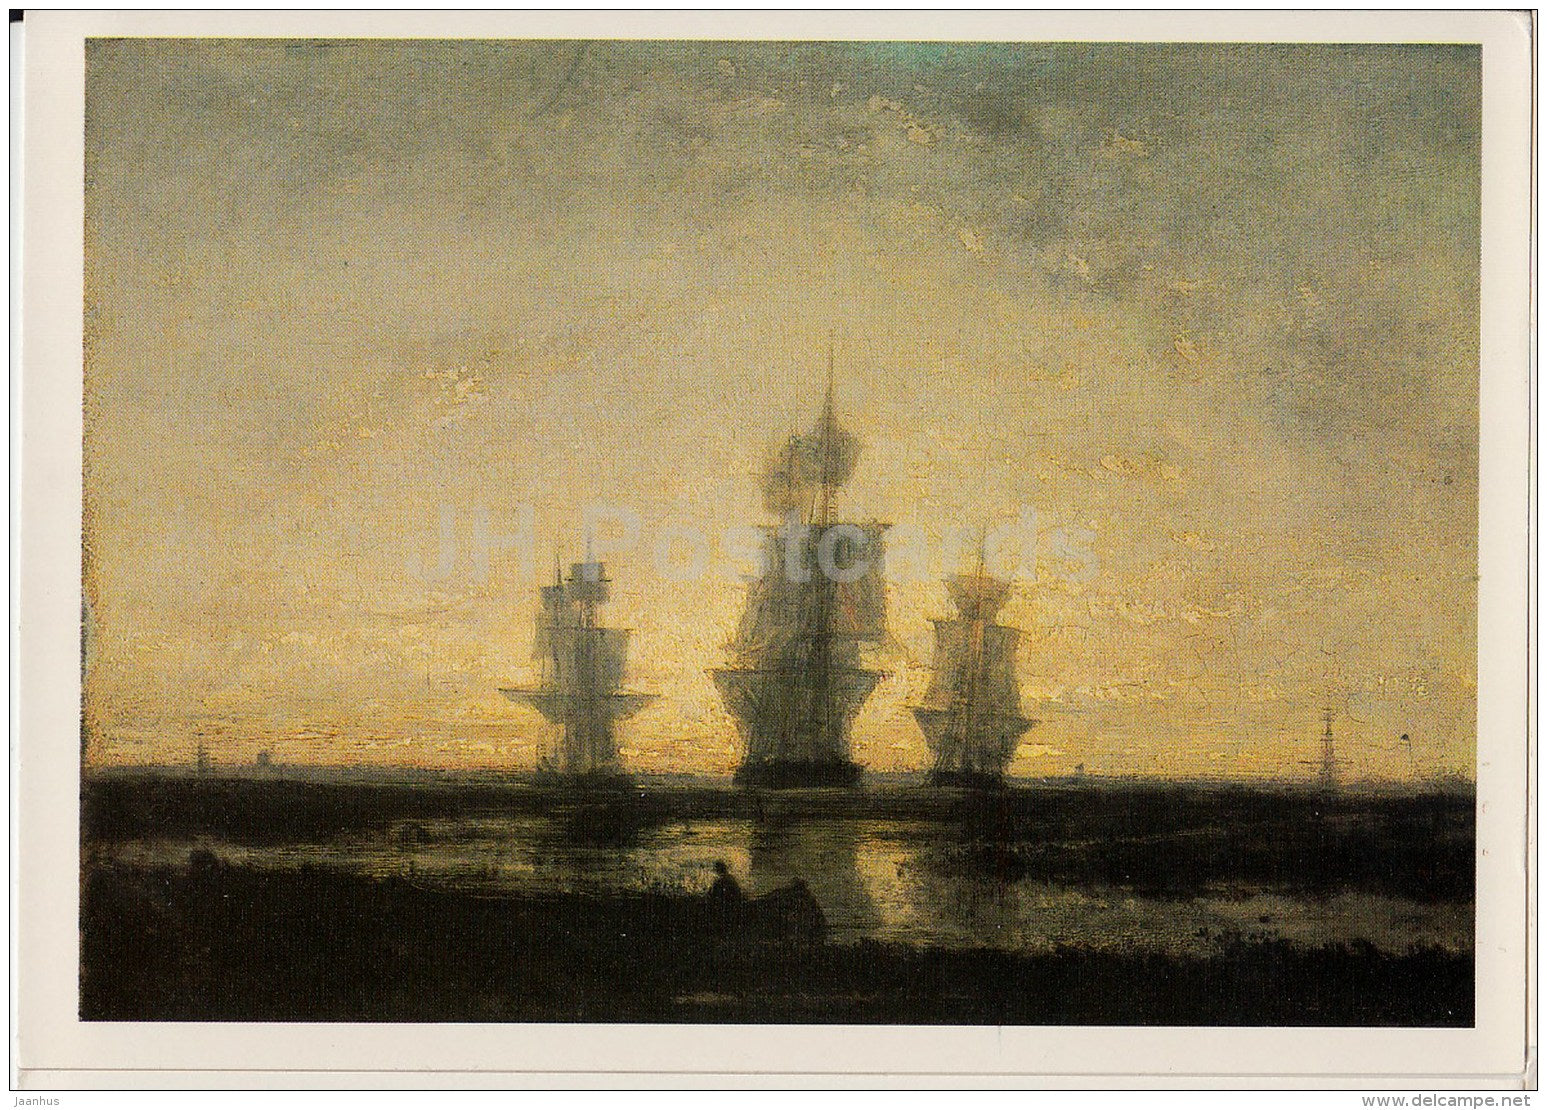 painting by Felix Ziem - Seashore during the calm - sailing ship - French art - 1983 - Russia USSR - unused - JH Postcards